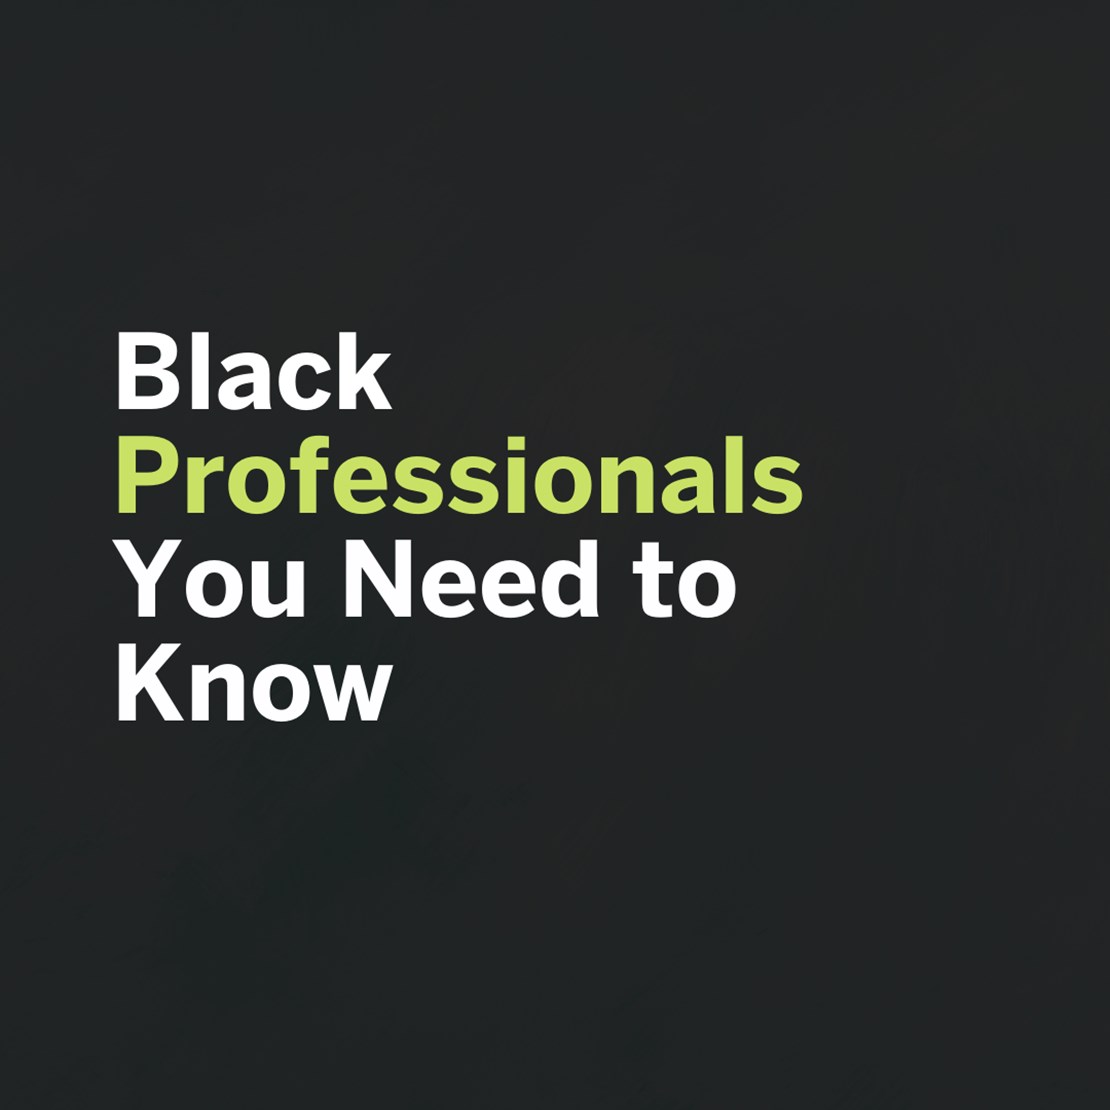 Black Professionals You Need to Know